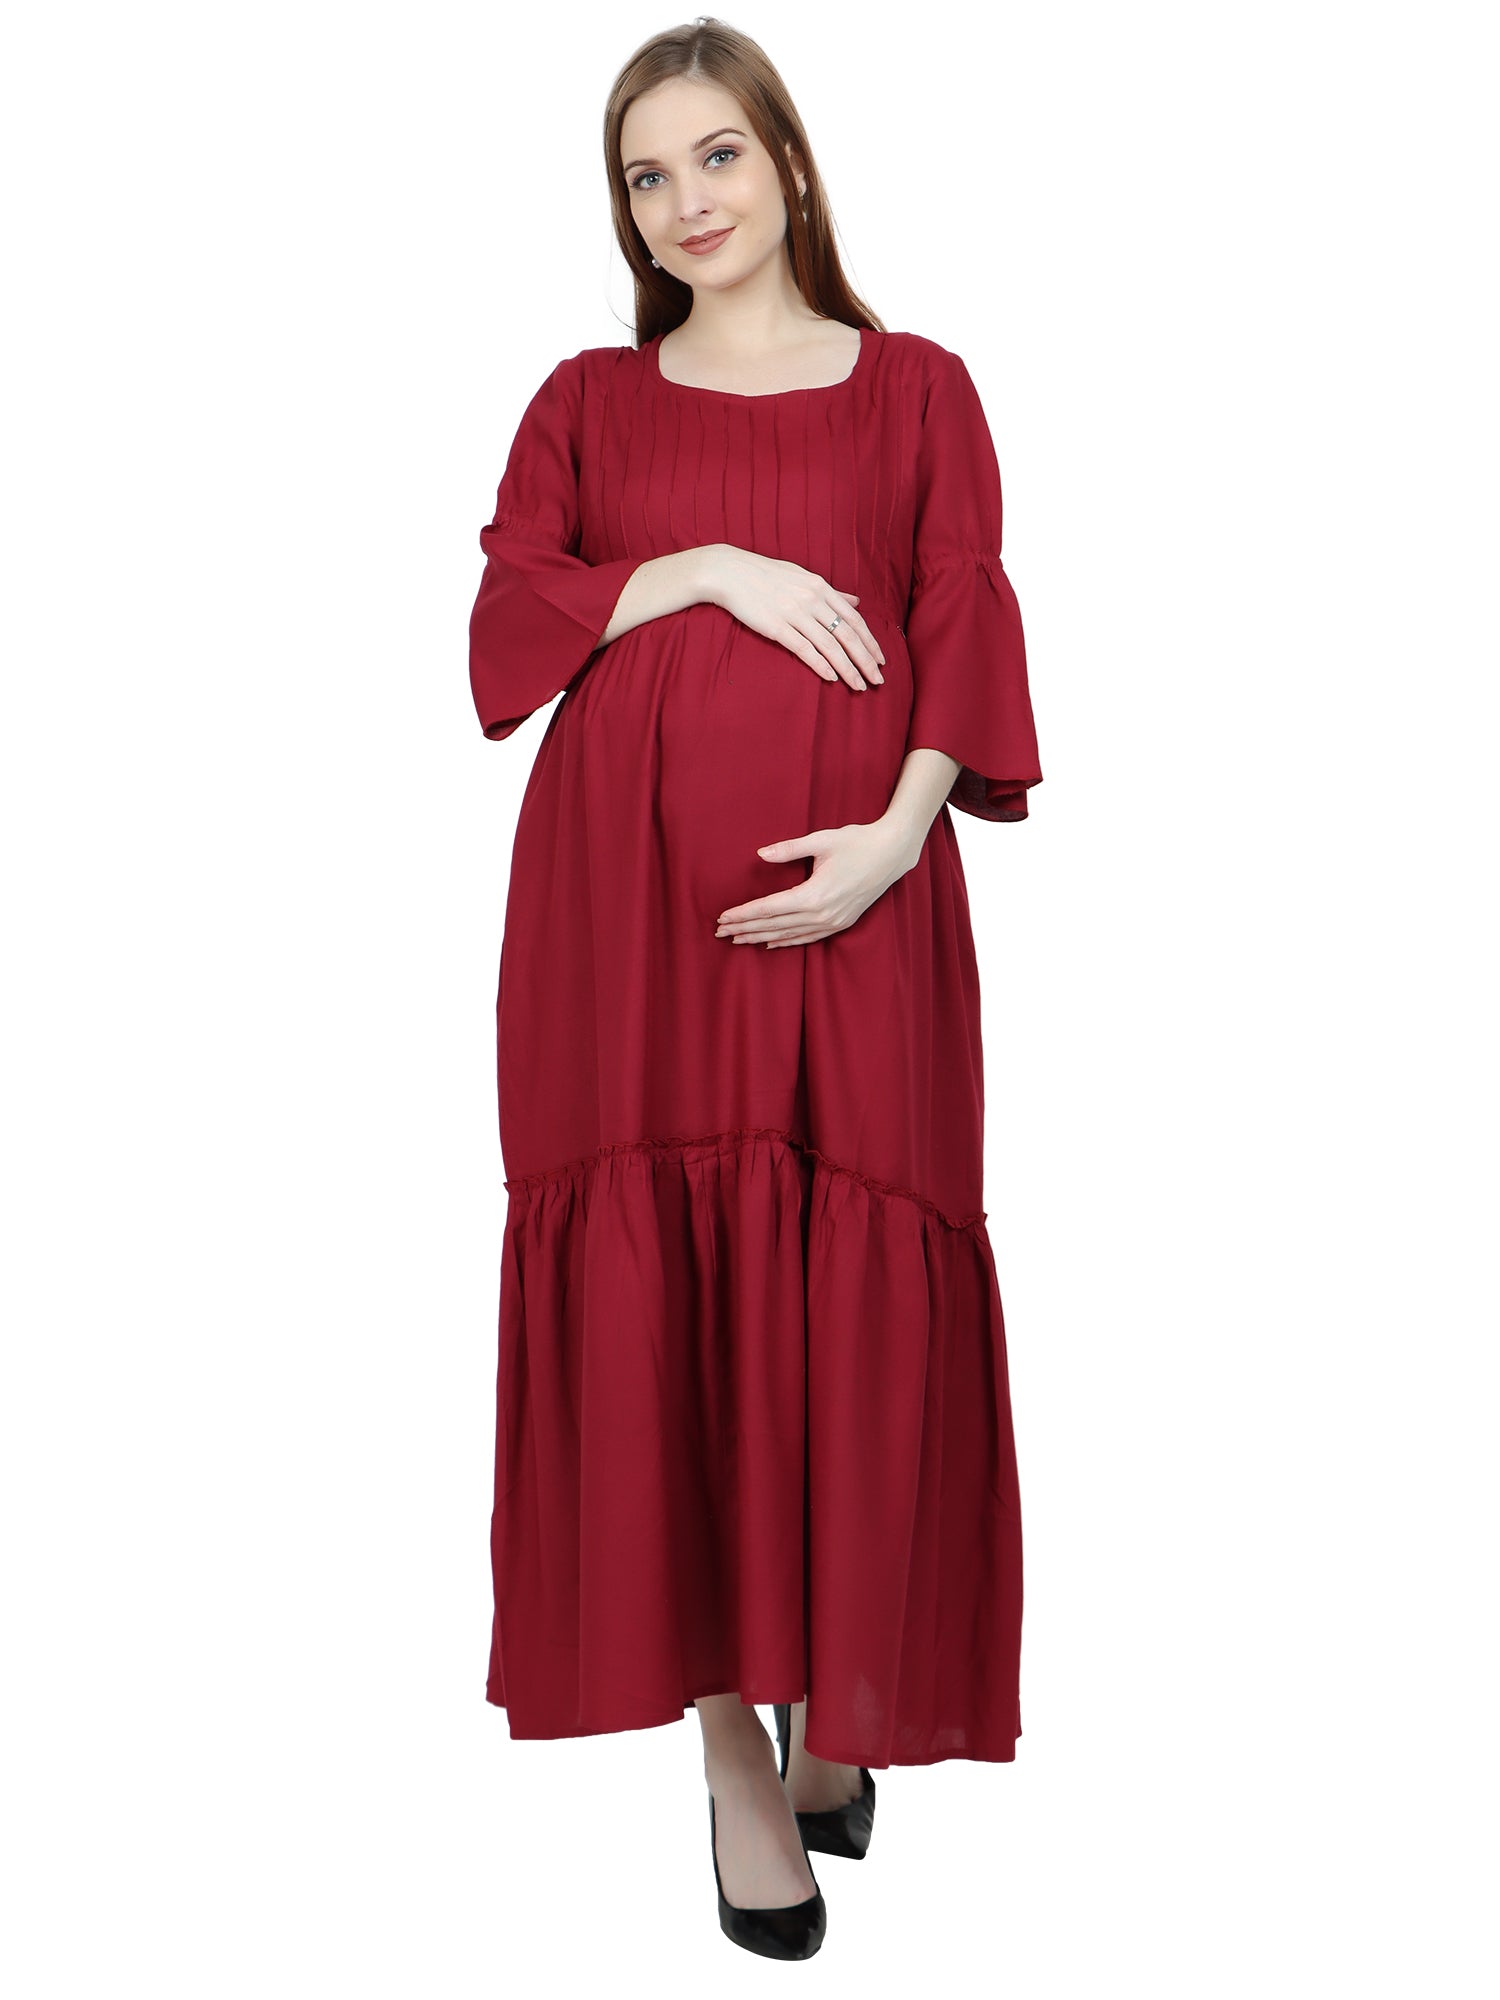 Rayon Maroon Maternity and Feeding Dress with Cotton Lining